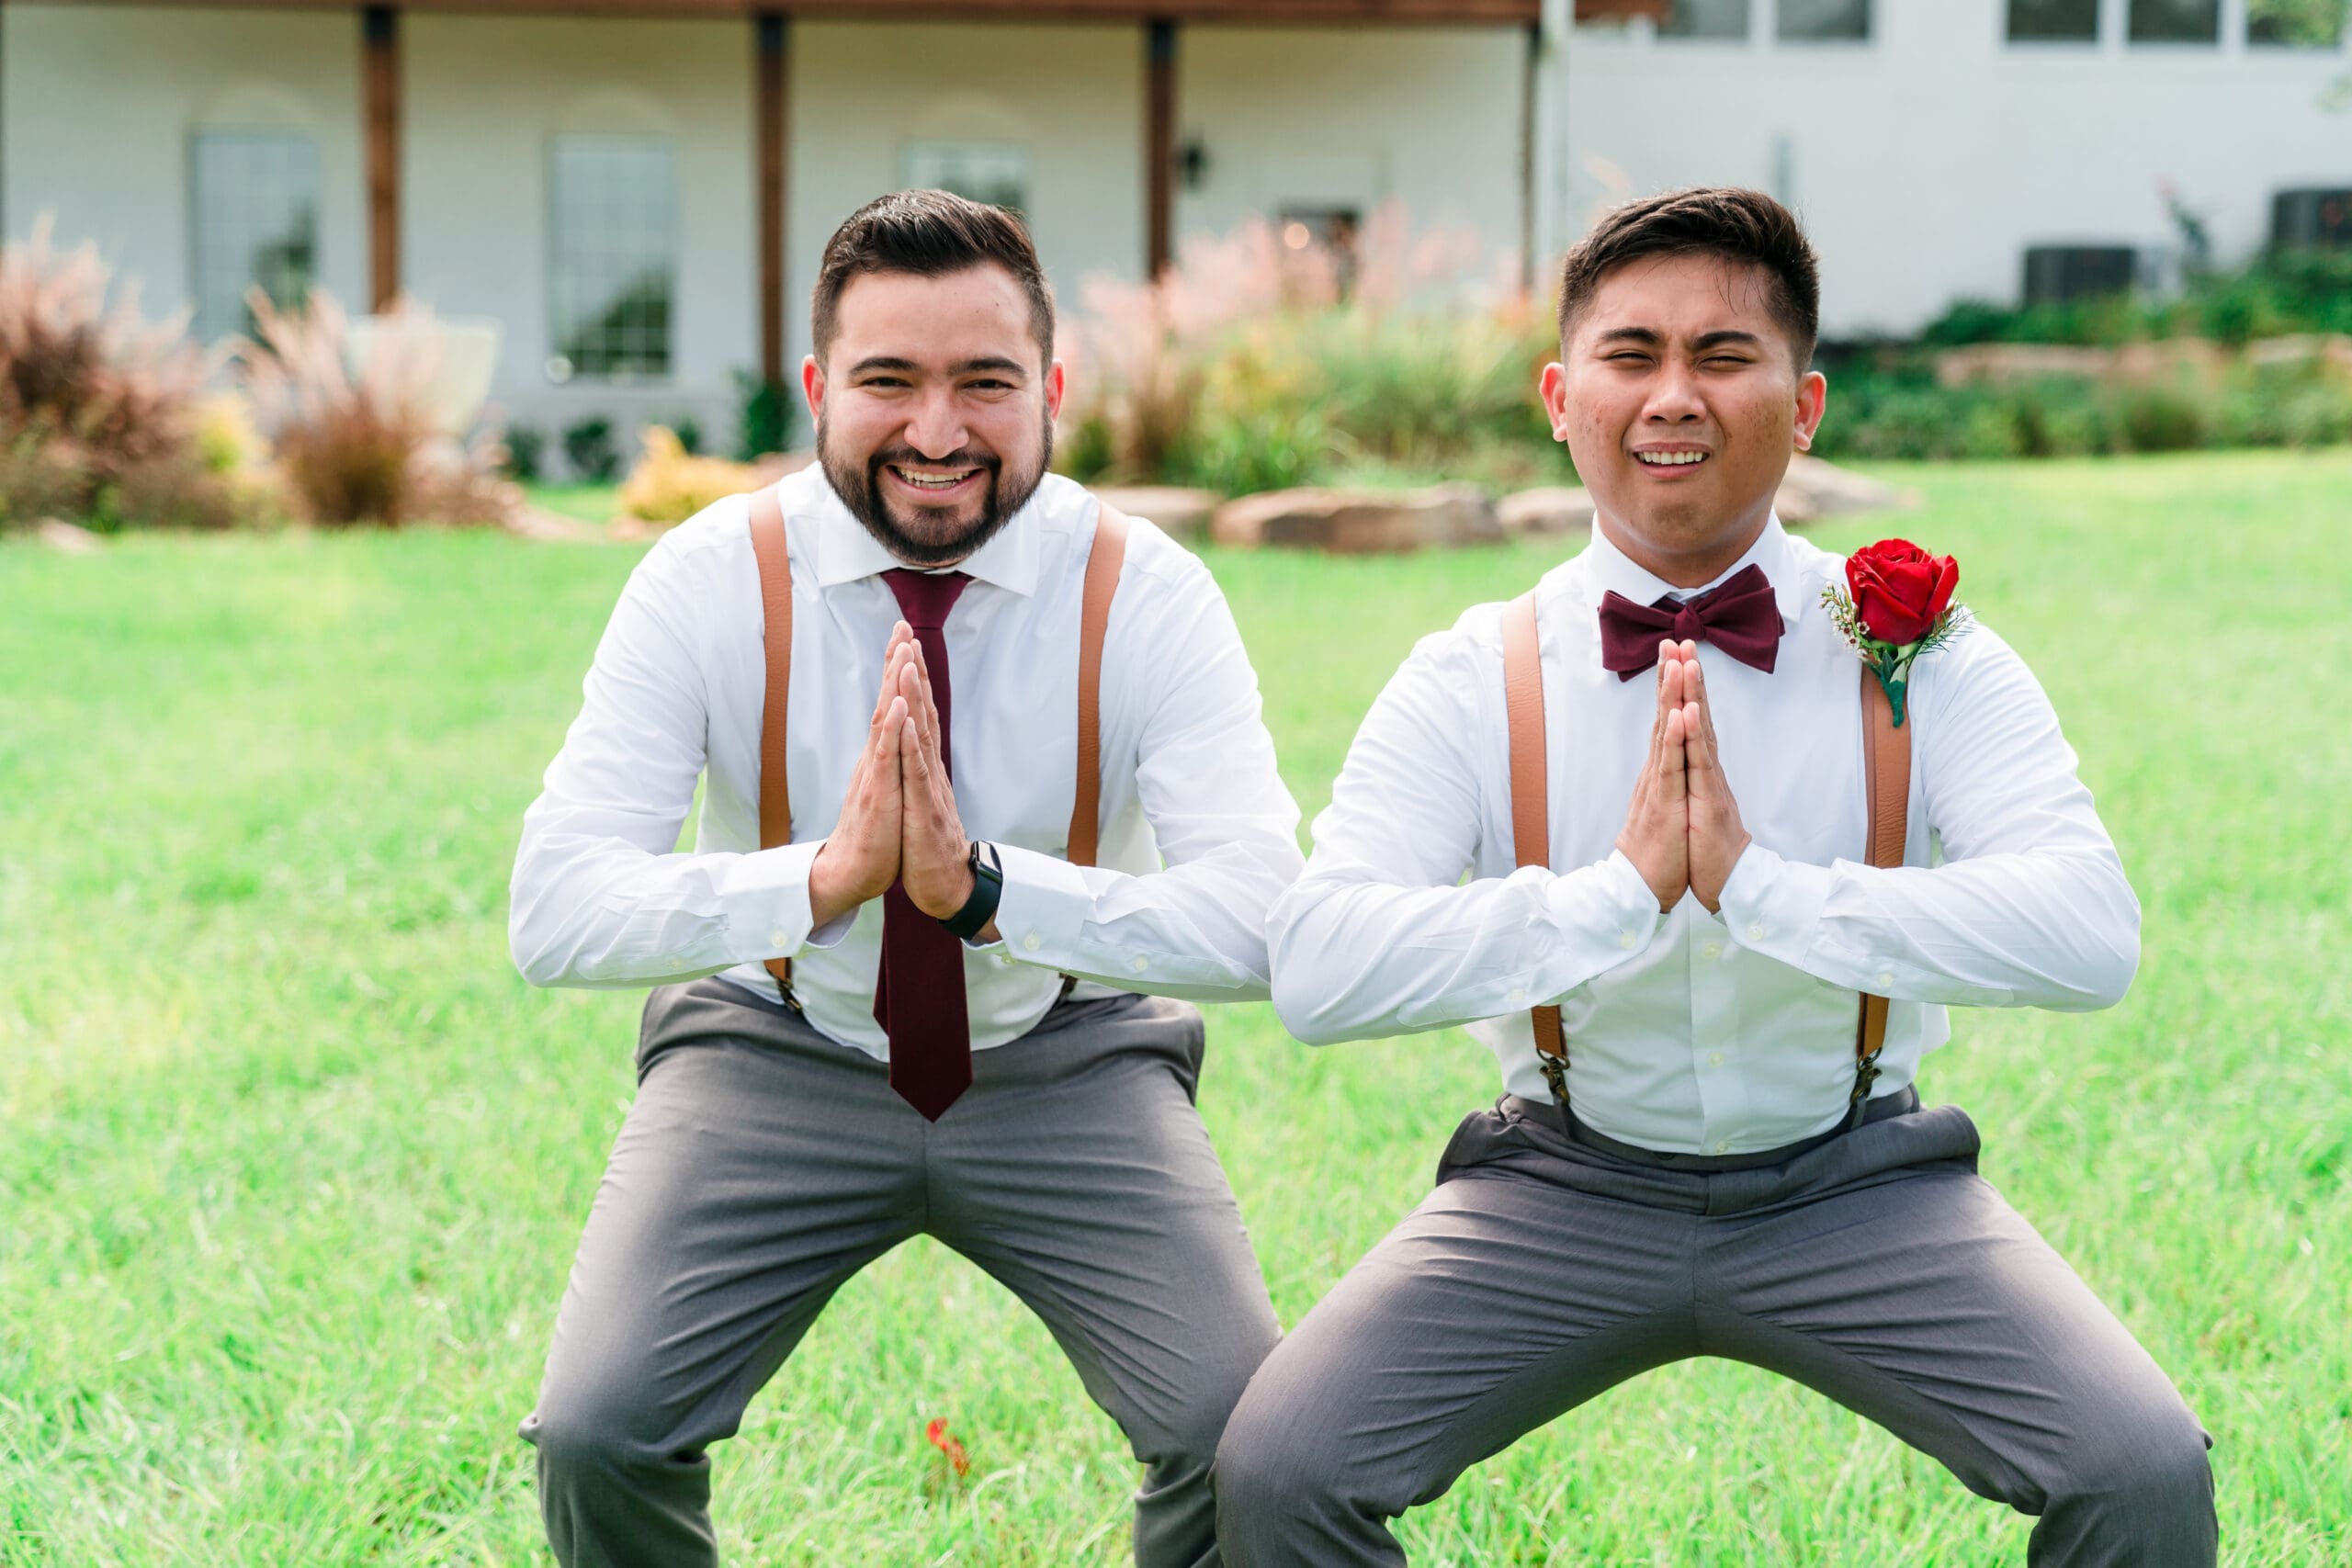 Jonah and his groomsmen in a squatting position with prayer hands, showcasing their fun personalities at Sterling Event Venue Garden